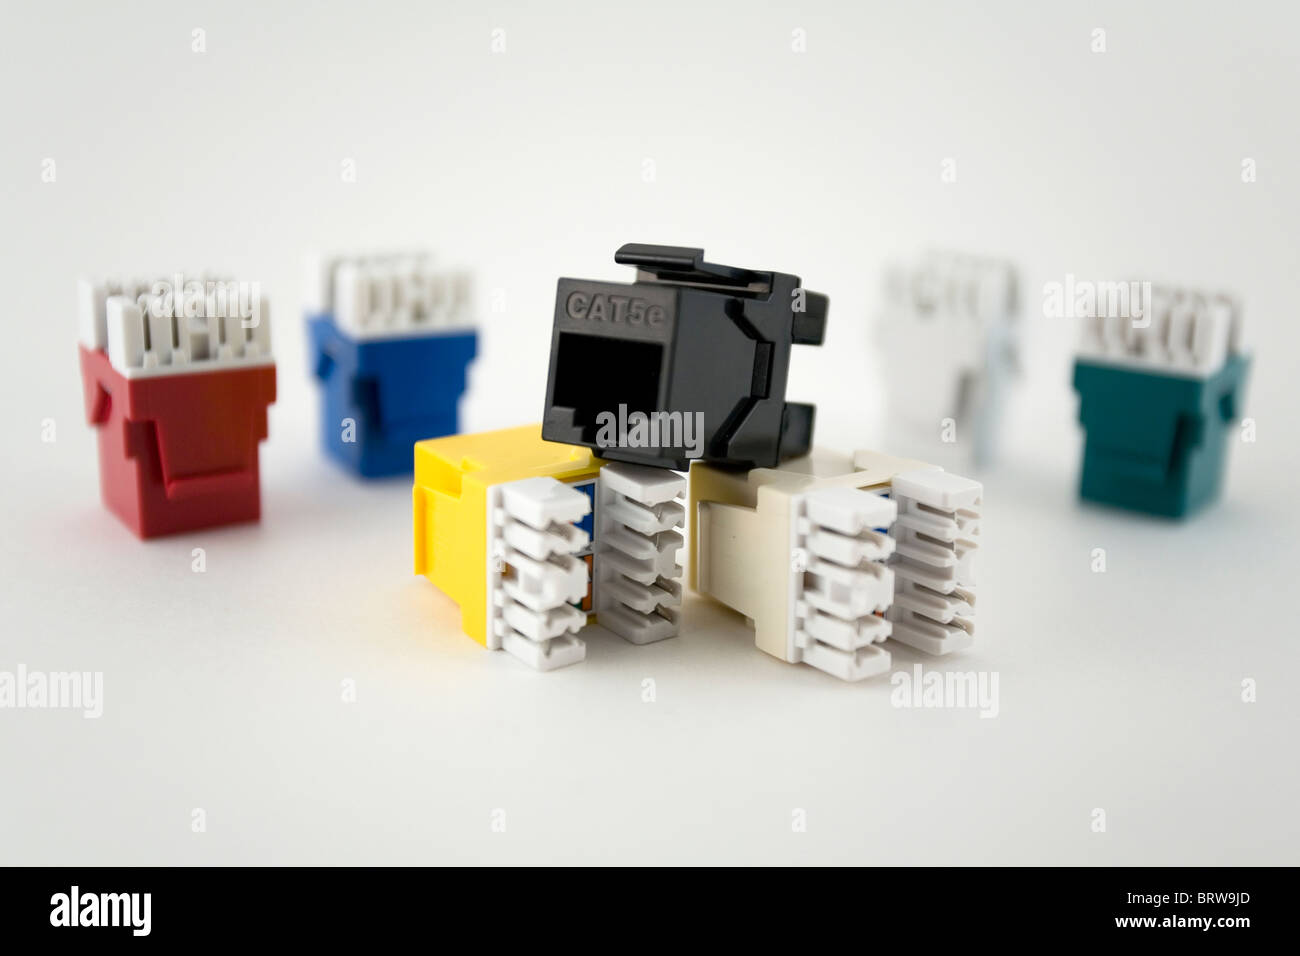 Modules, connectors, cables, plug in, color, macro, close up, advertising, catalogue Stock Photo